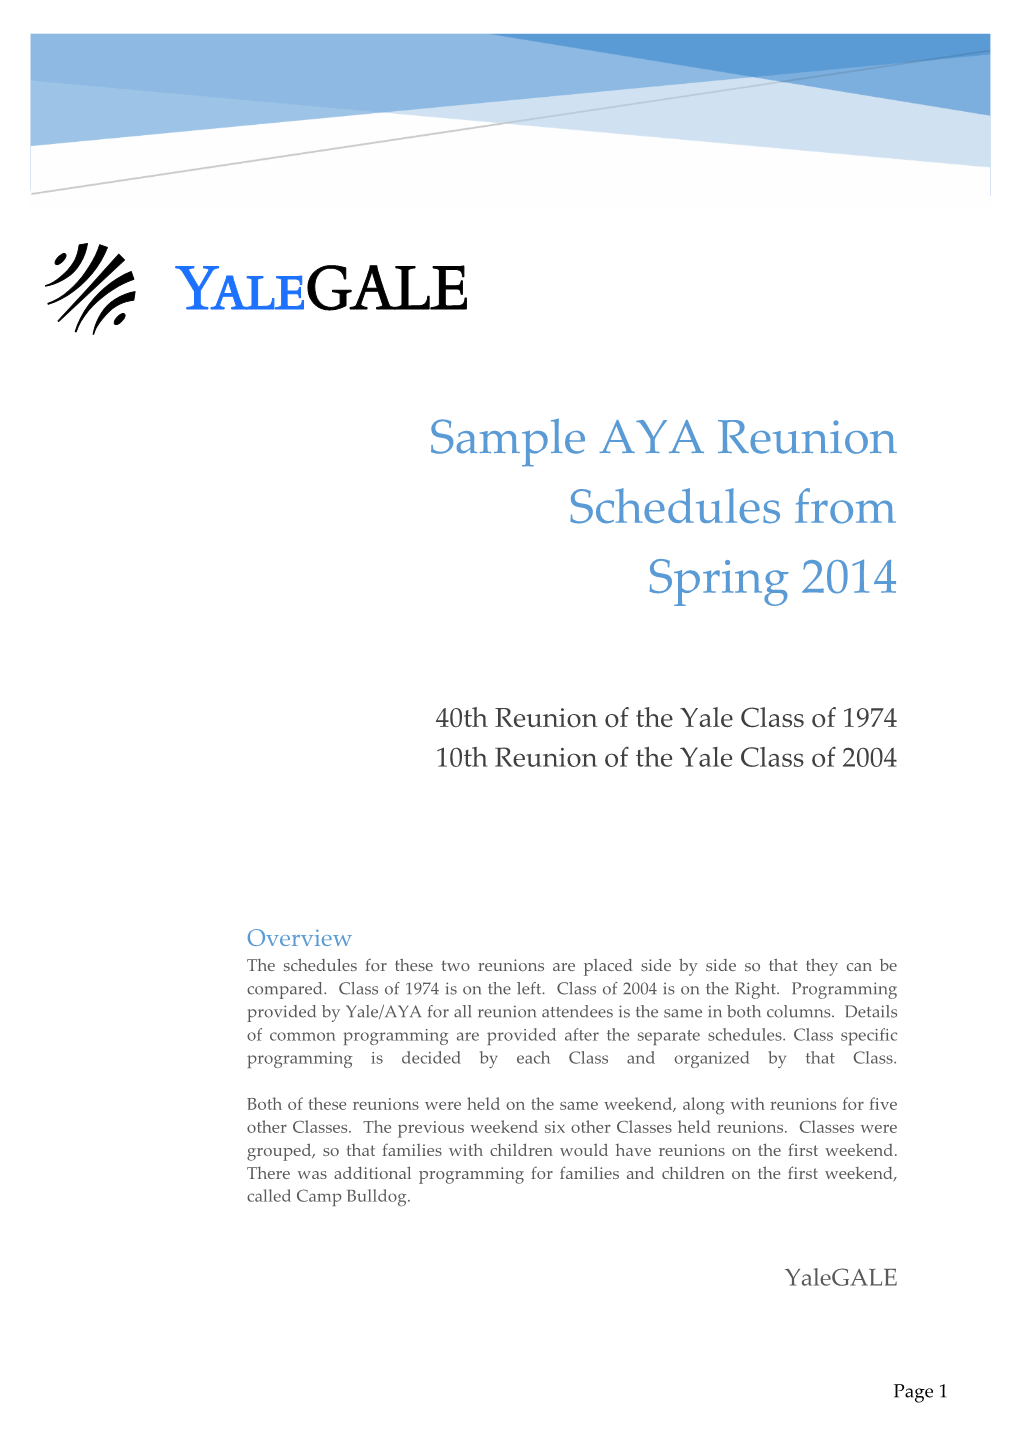 Sample AYA Reunion Schedules from Spring 2014